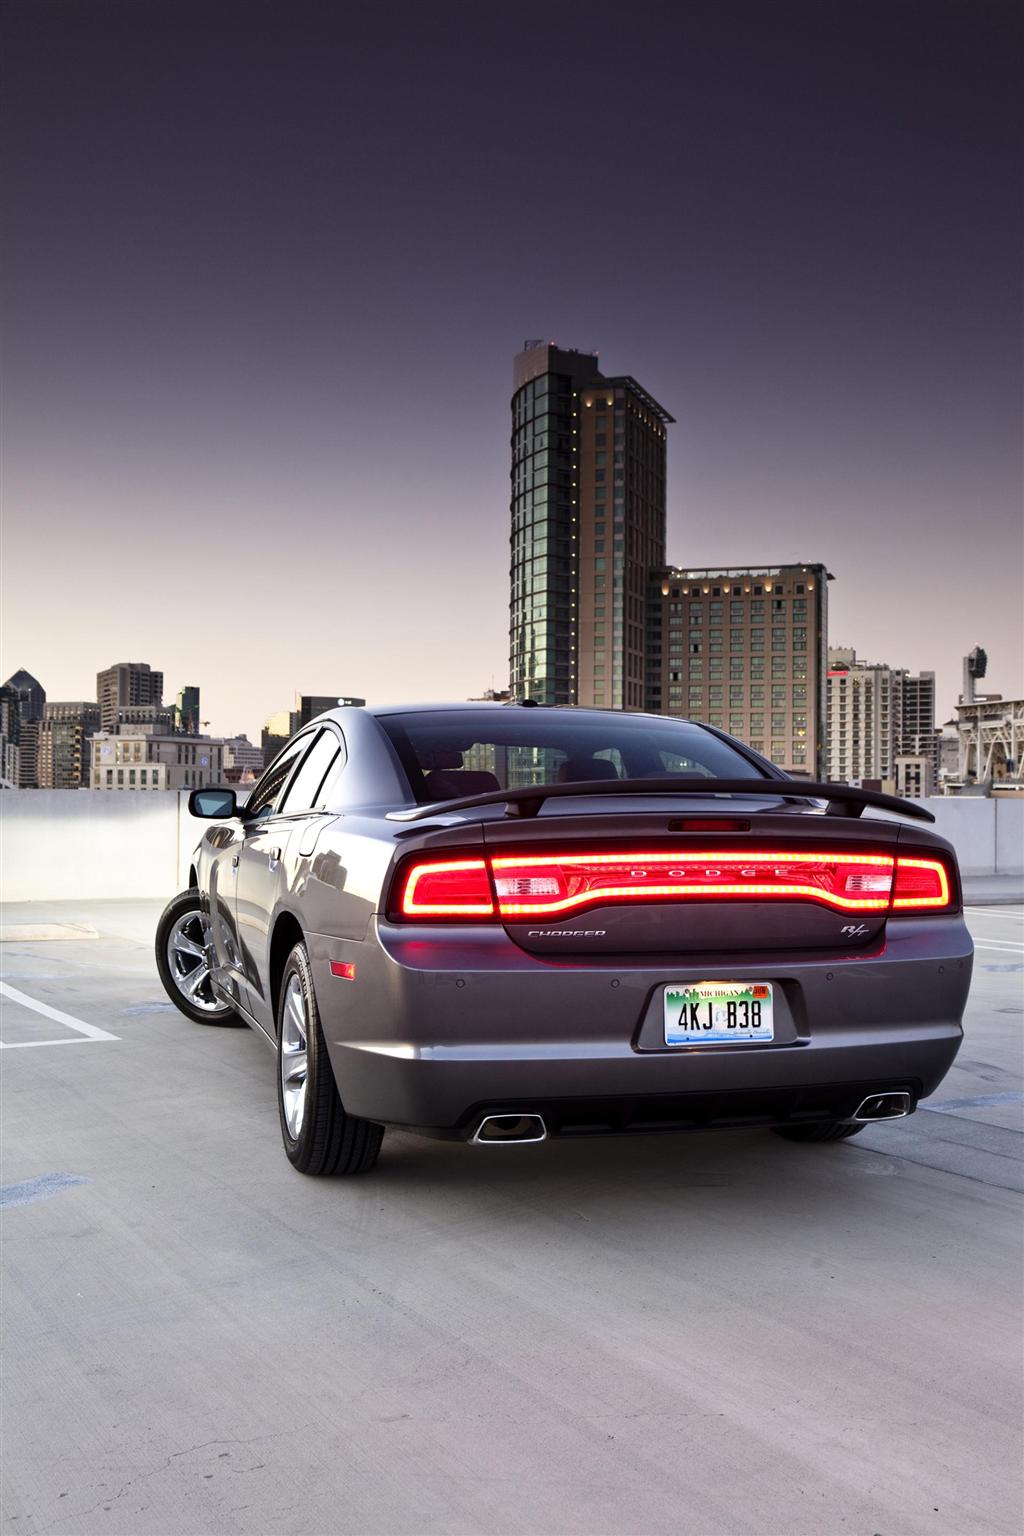 2012 Dodge Charger Image. Photo 11 of 12